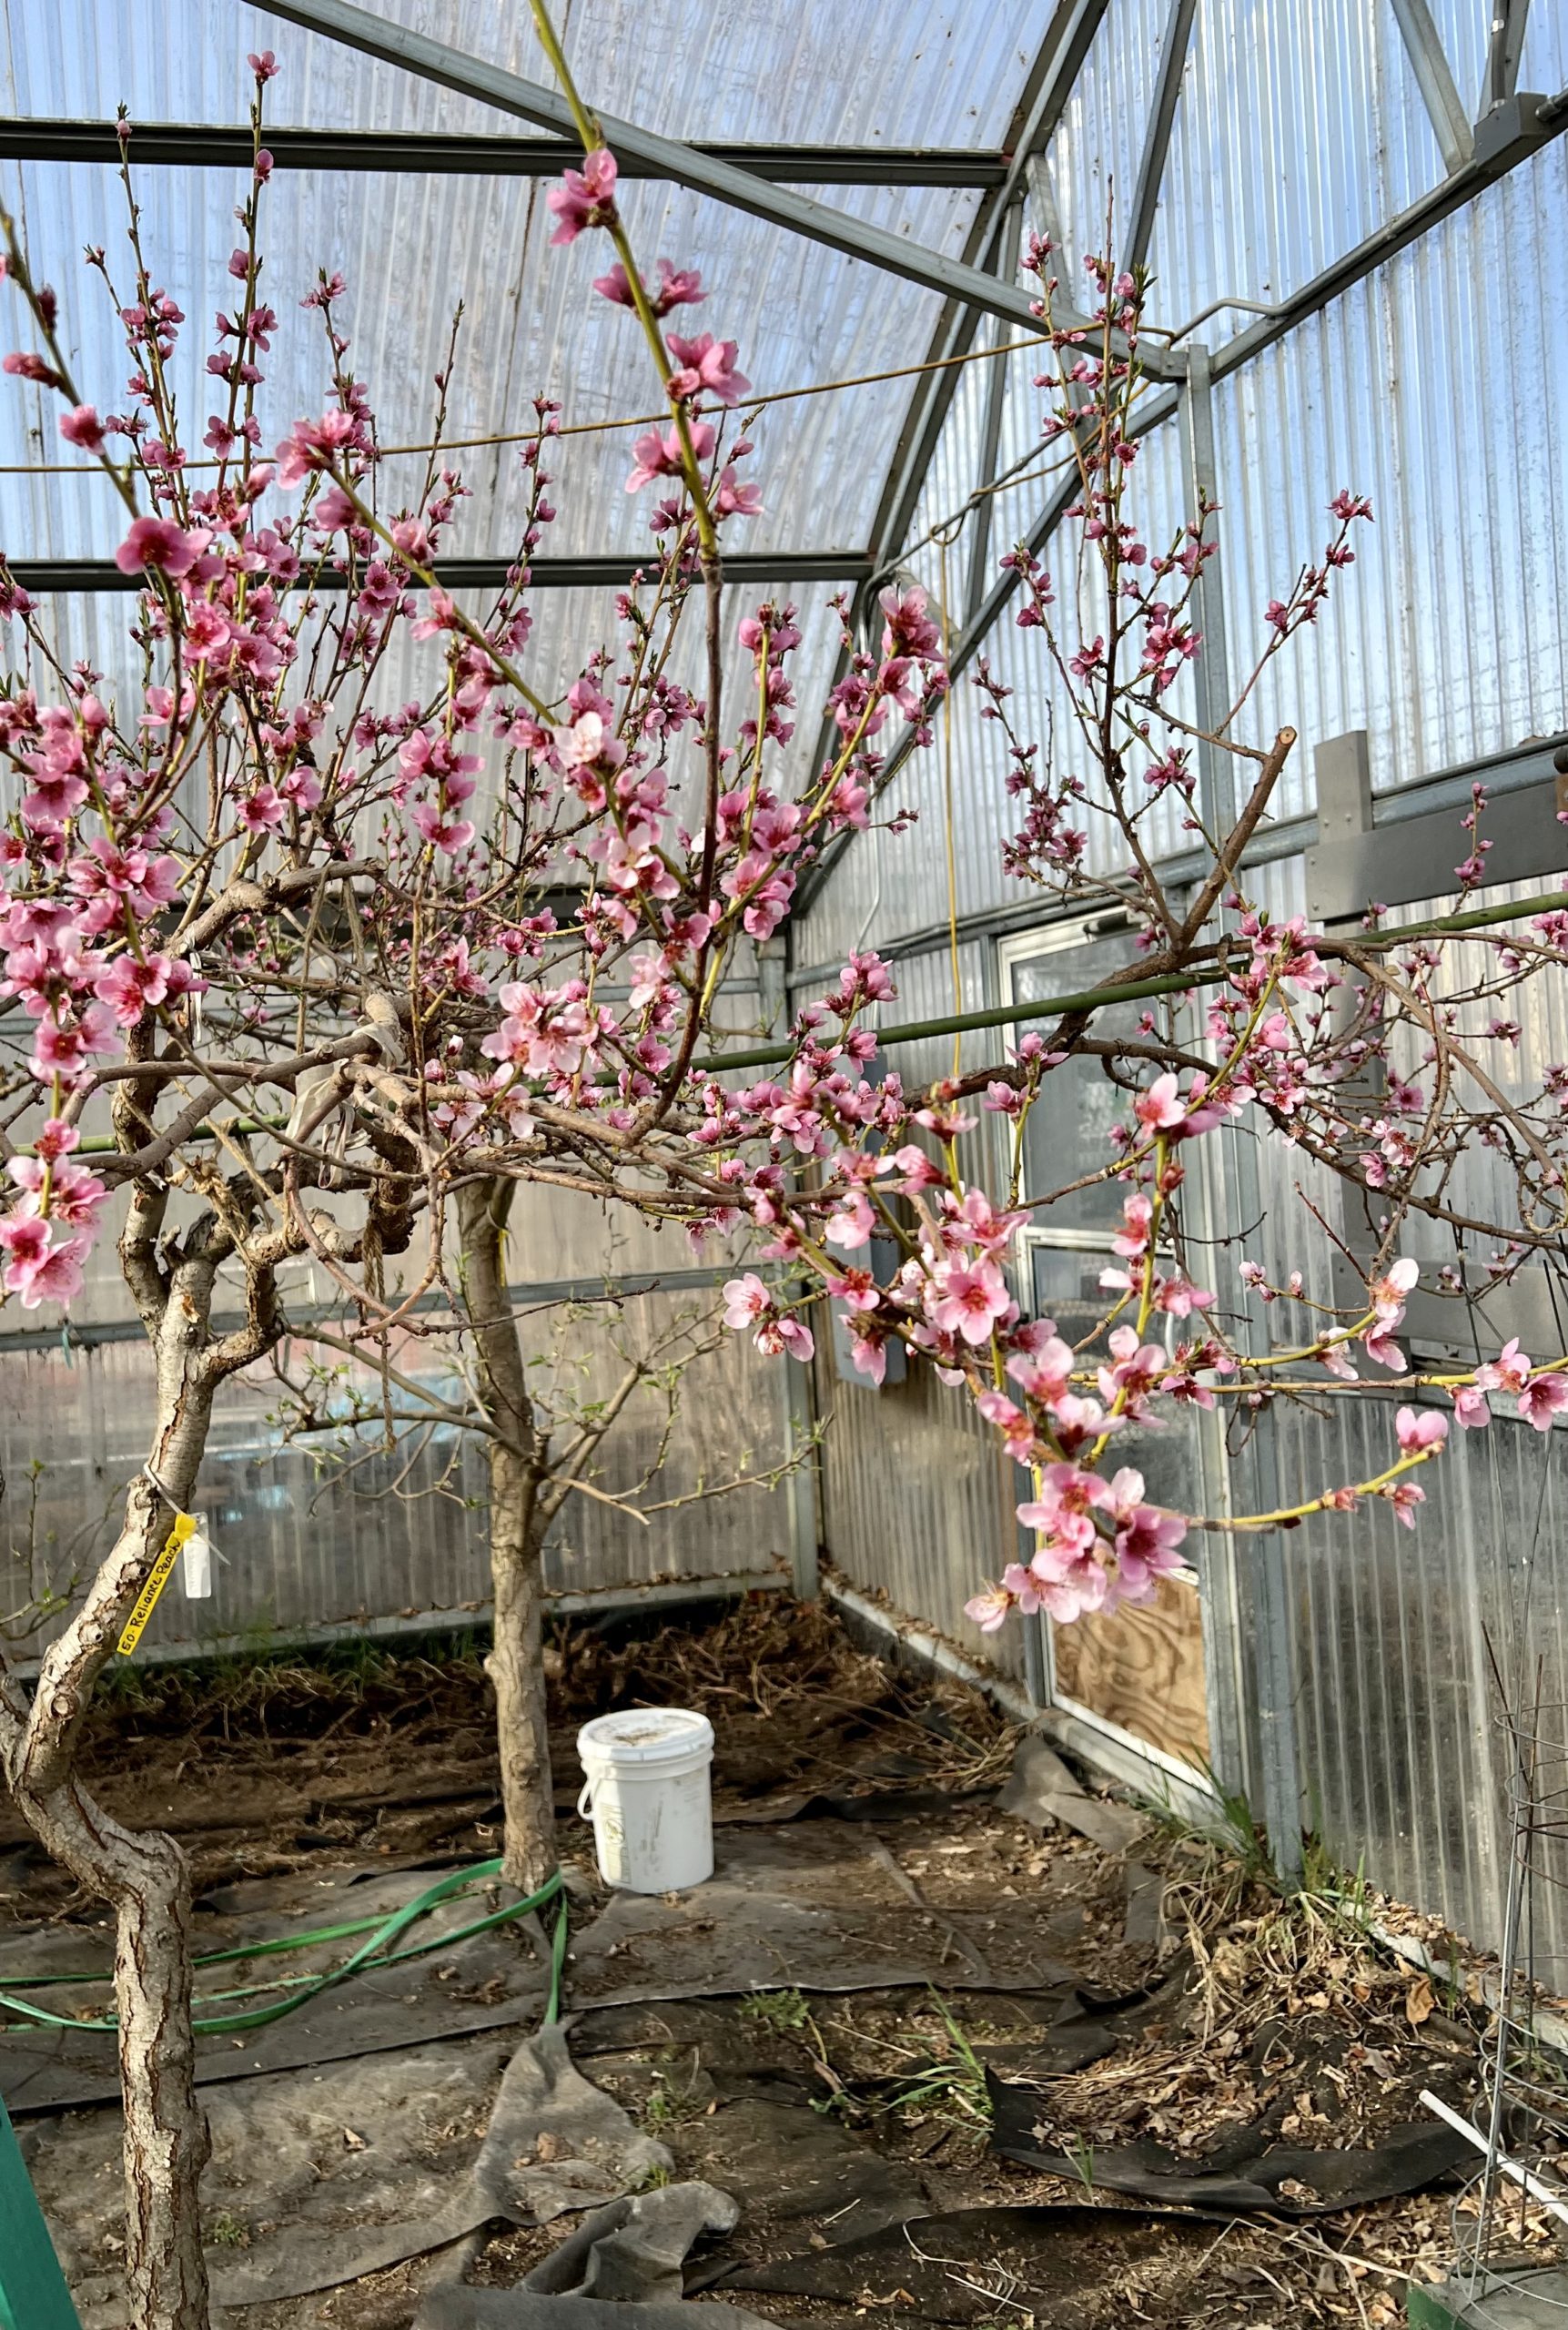 Reliance Peach Tree in bloom at Greenhouse of Friends of Boyer’s Orchard in Anchorage Alaska